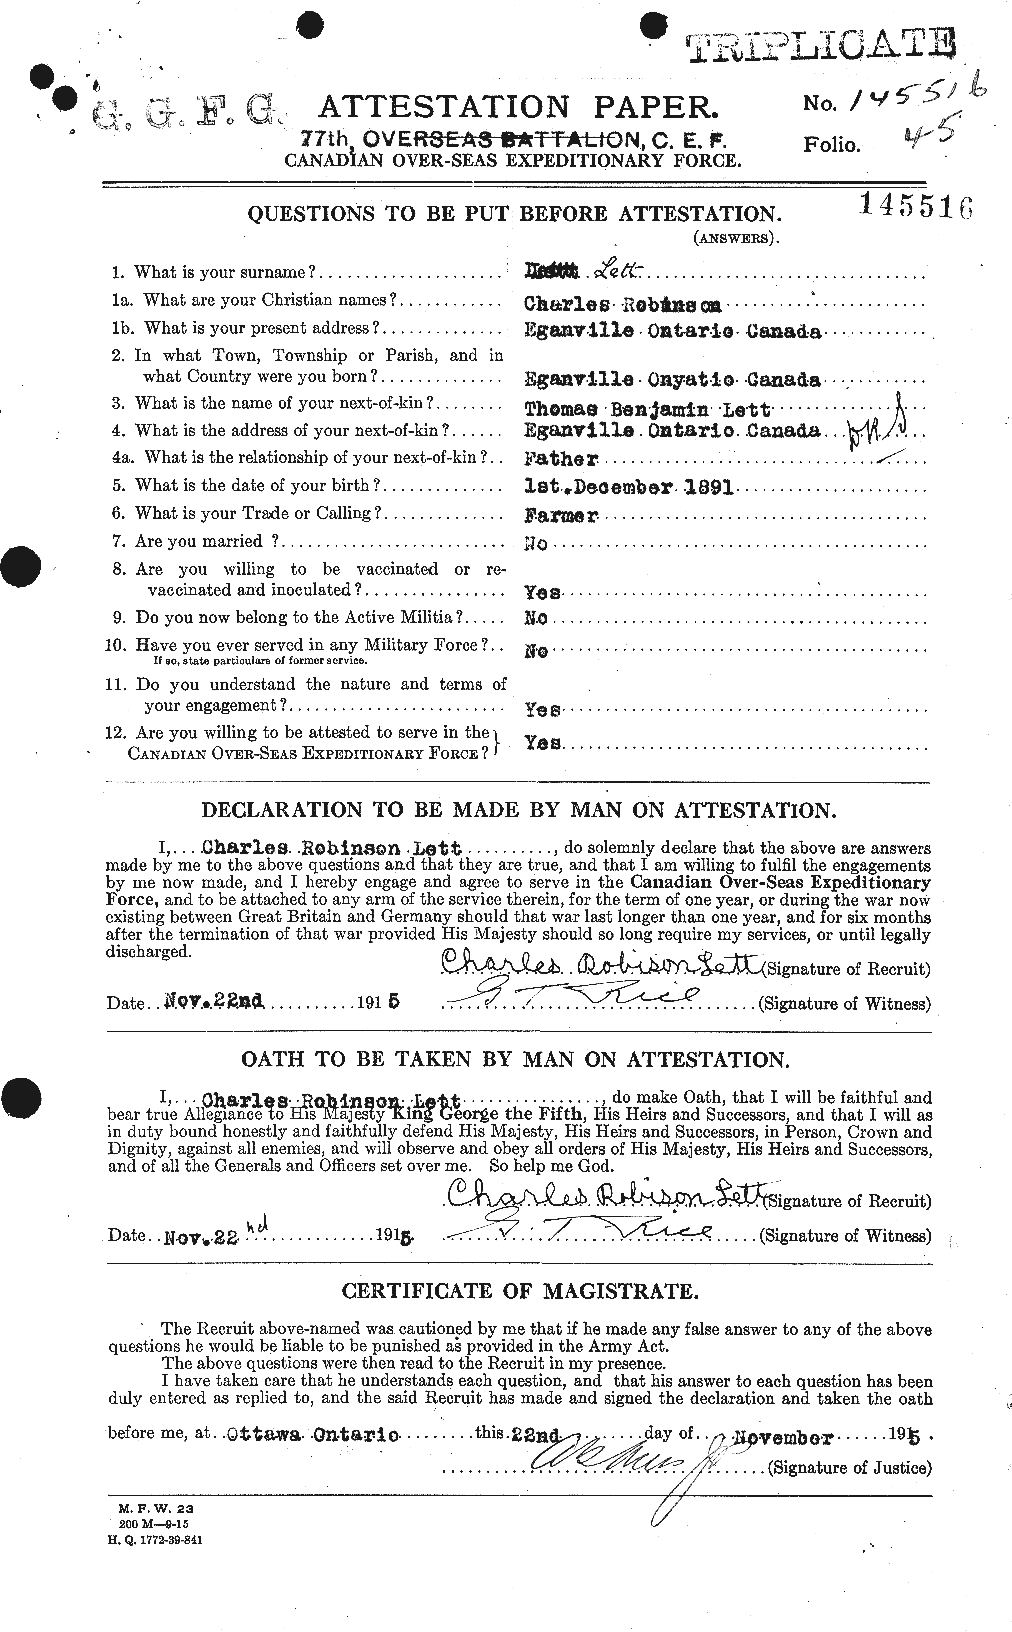 Personnel Records of the First World War - CEF 463476a